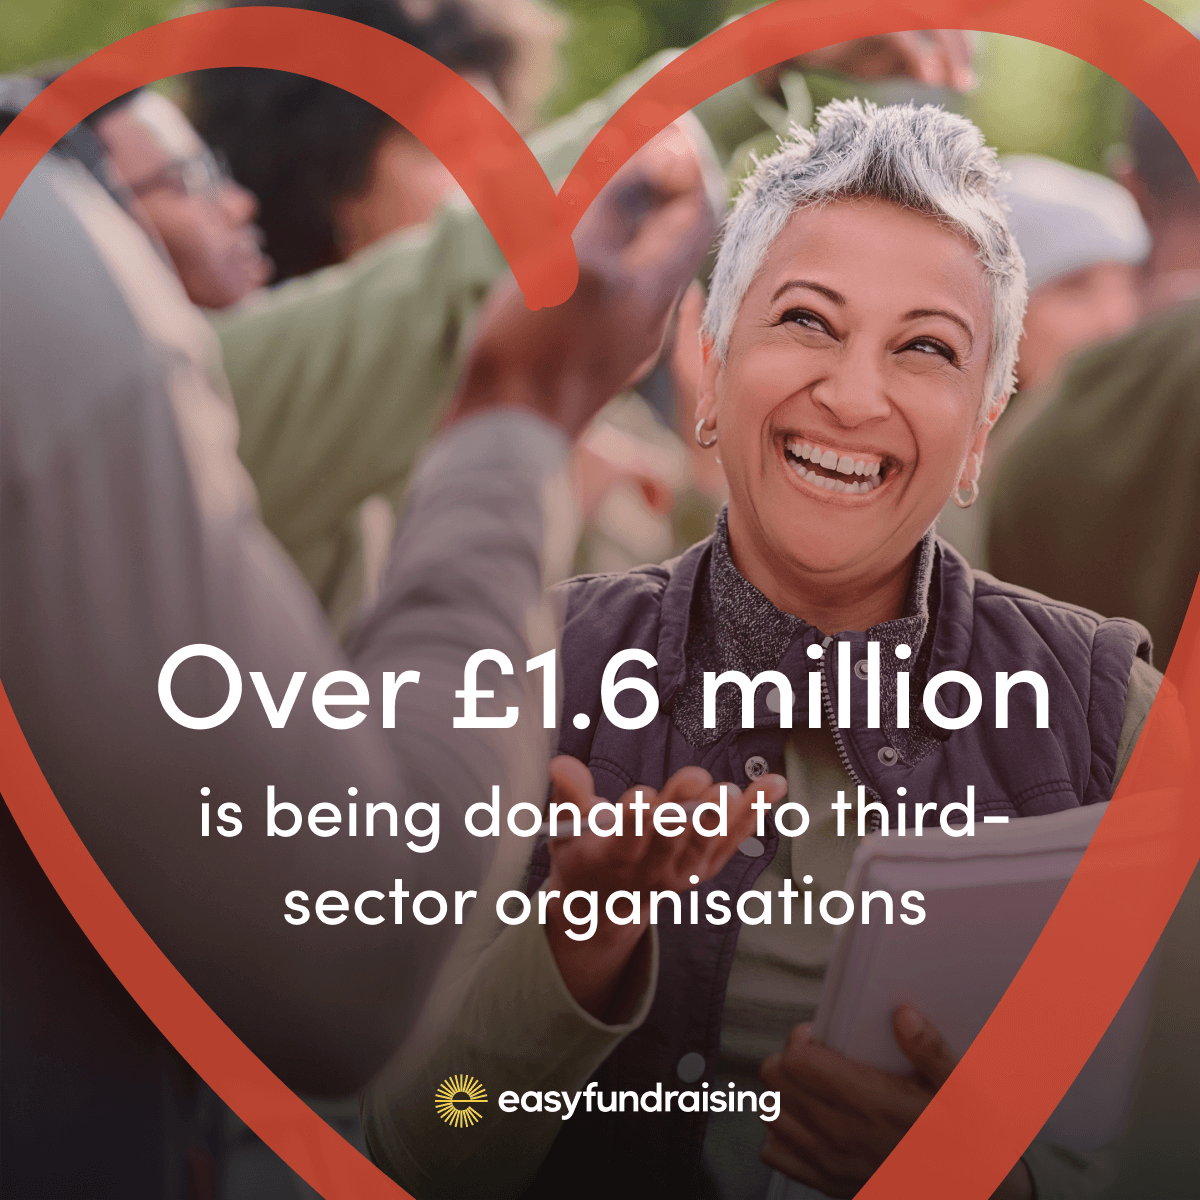 👏 Congratulations to all the organisations in our area that have just received a share of £1.6m in easyfundraising donations. To find out more and receive funds in easyfundraising’s next #donationday in May, visit easyfundraising.org.uk/lancaster